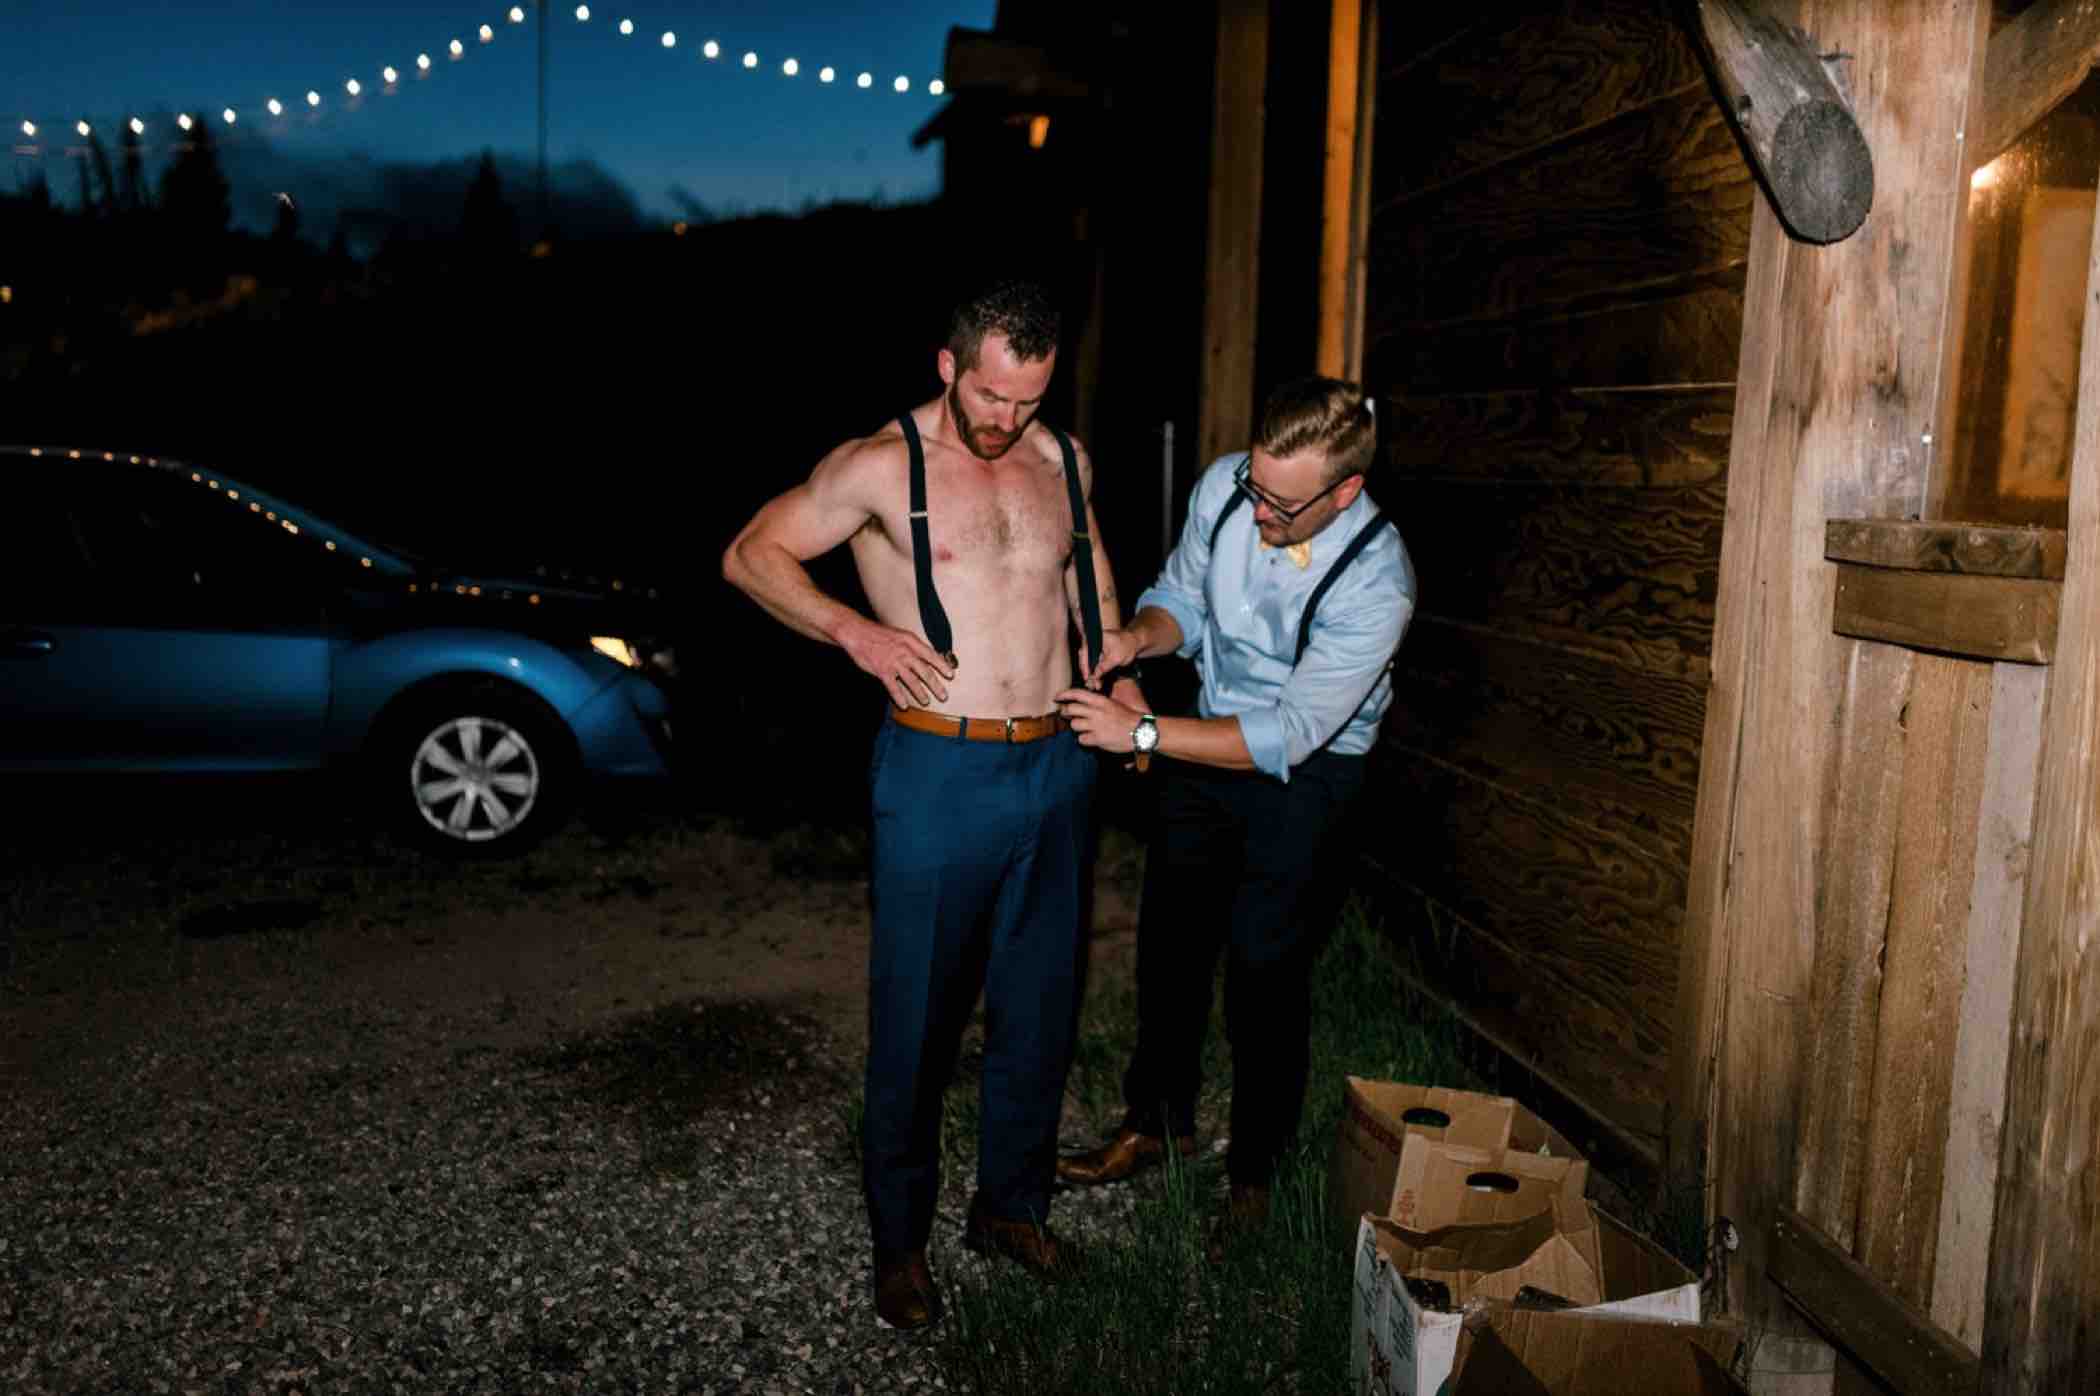 The groom got progressively more shirtless as the night went on during the wedding reception at Piney River Ranch in Vail, Colorado. Photo by Ali and Garrett, Romantic, Adventurous, Nostalgic Wedding Photographers.